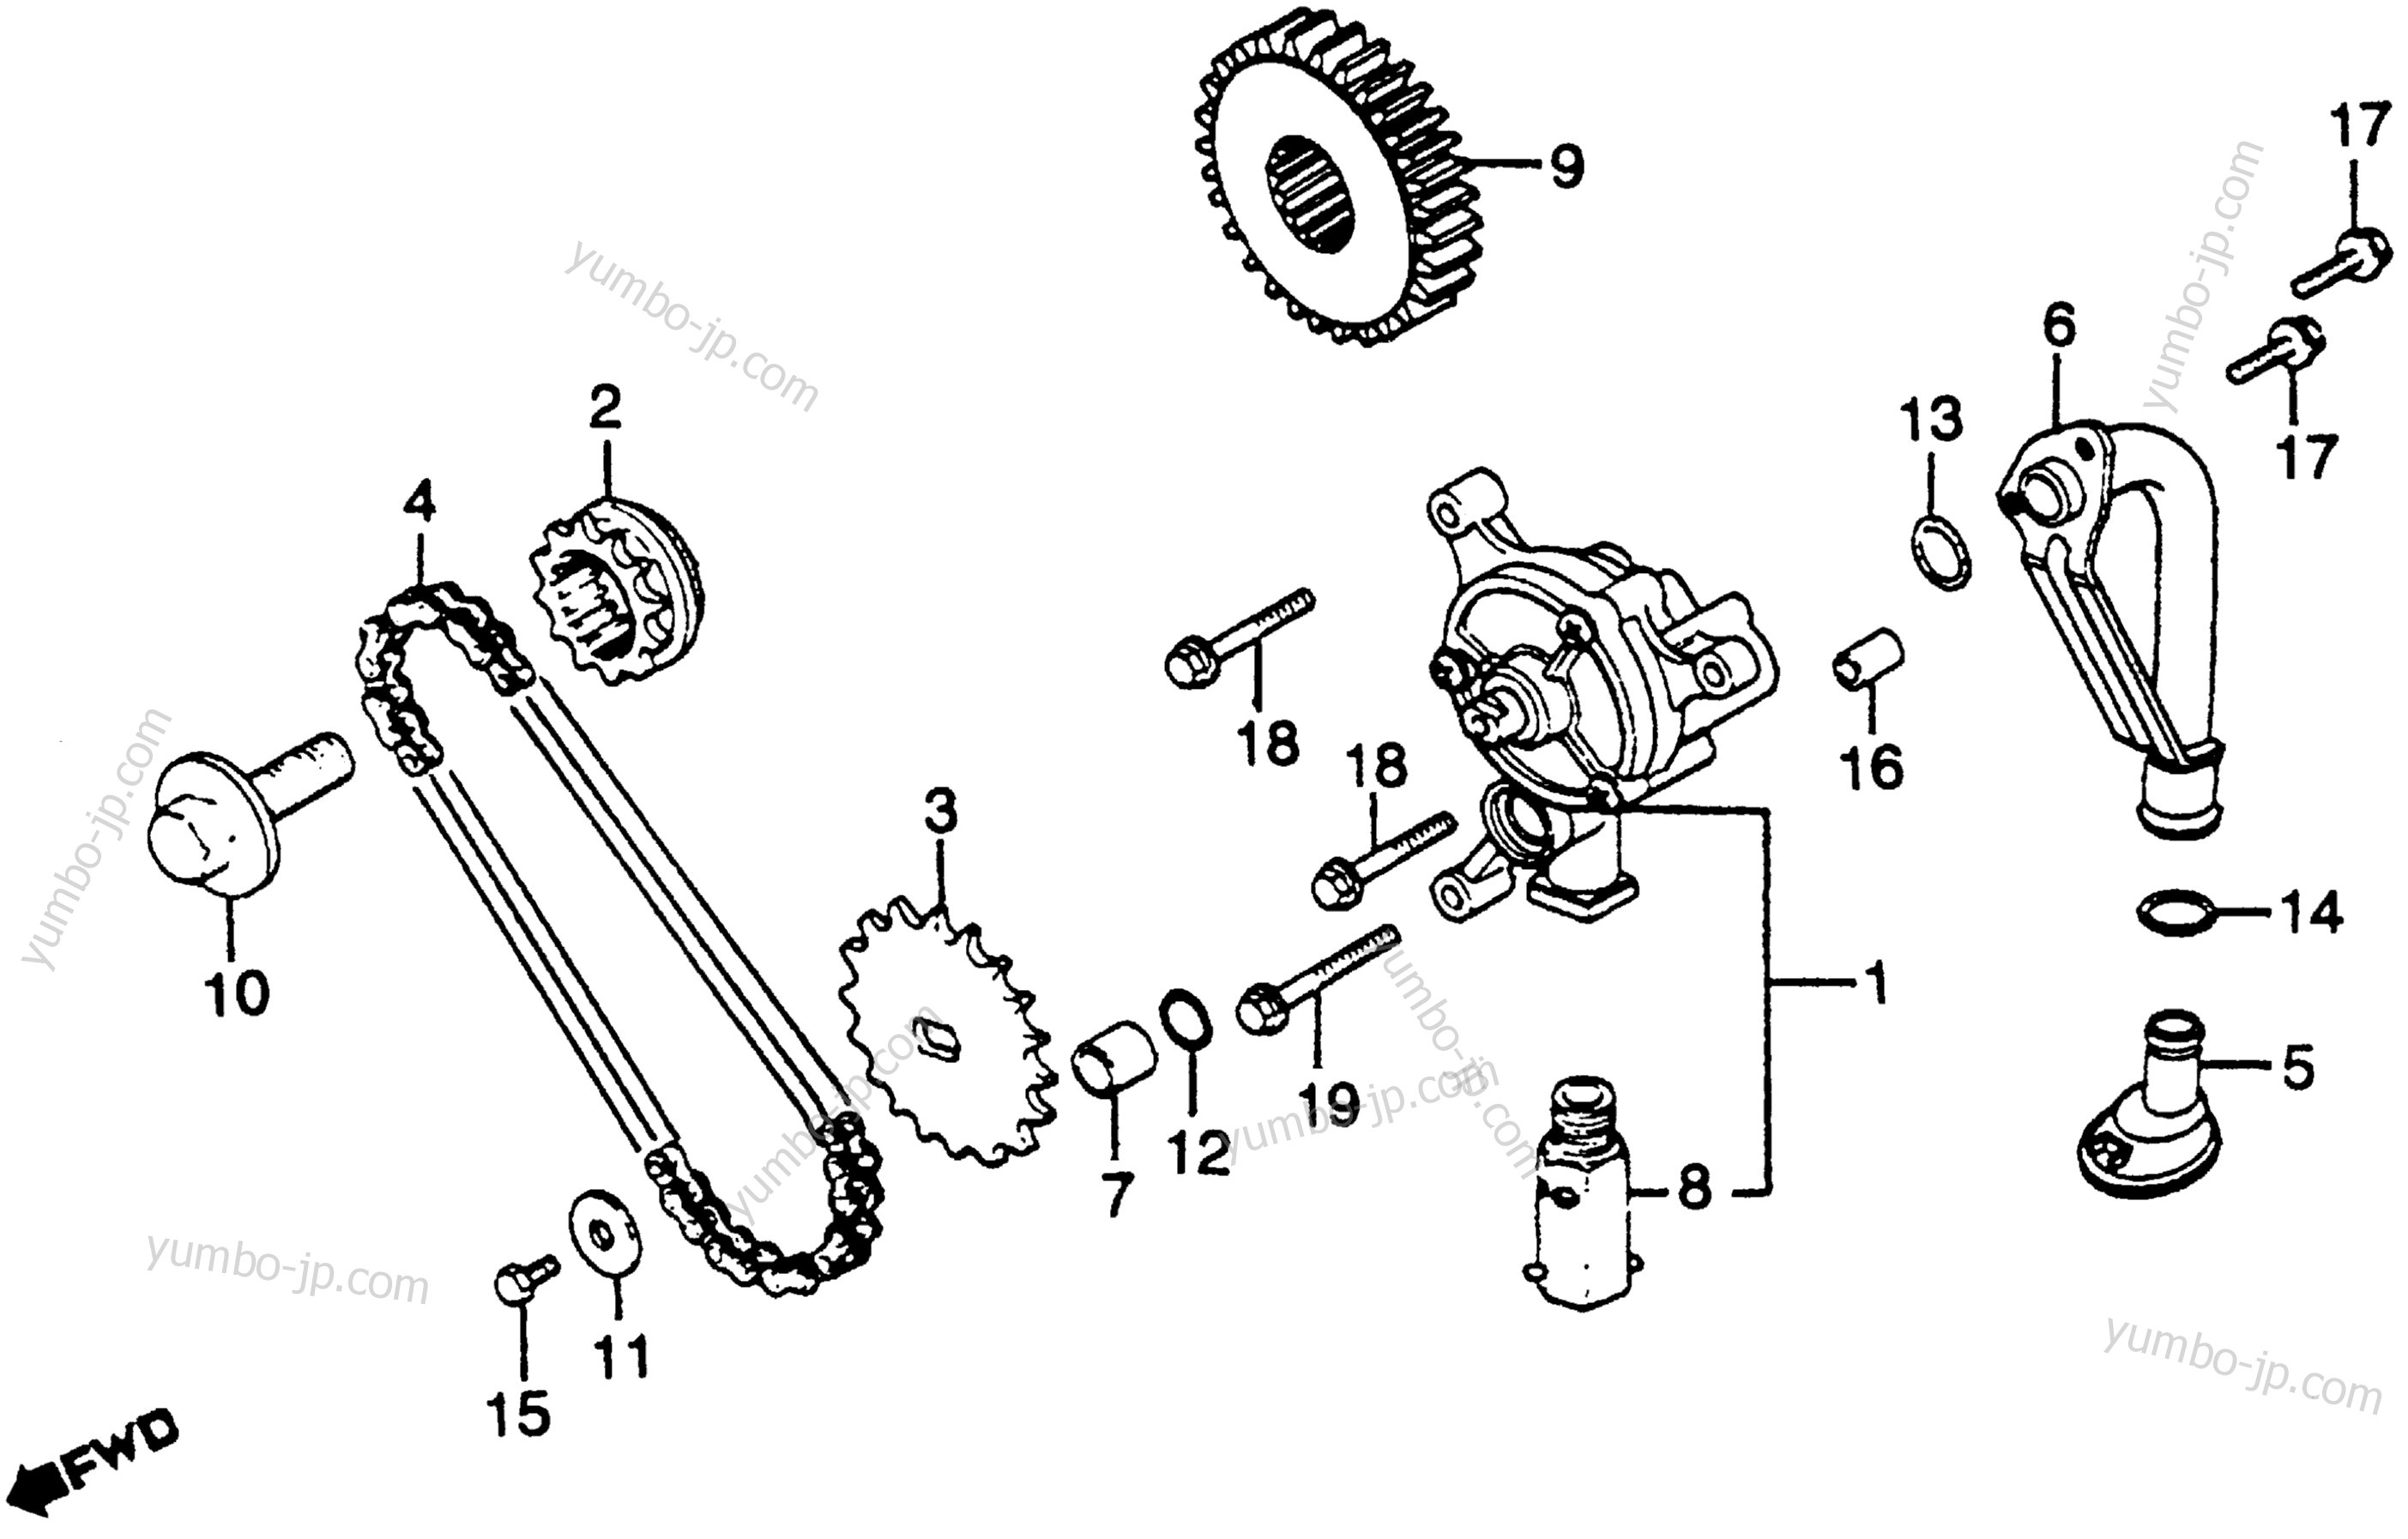 OIL PUMP / PRIMARY DRIVE GEAR for motorcycles HONDA GL650I A 1983 year